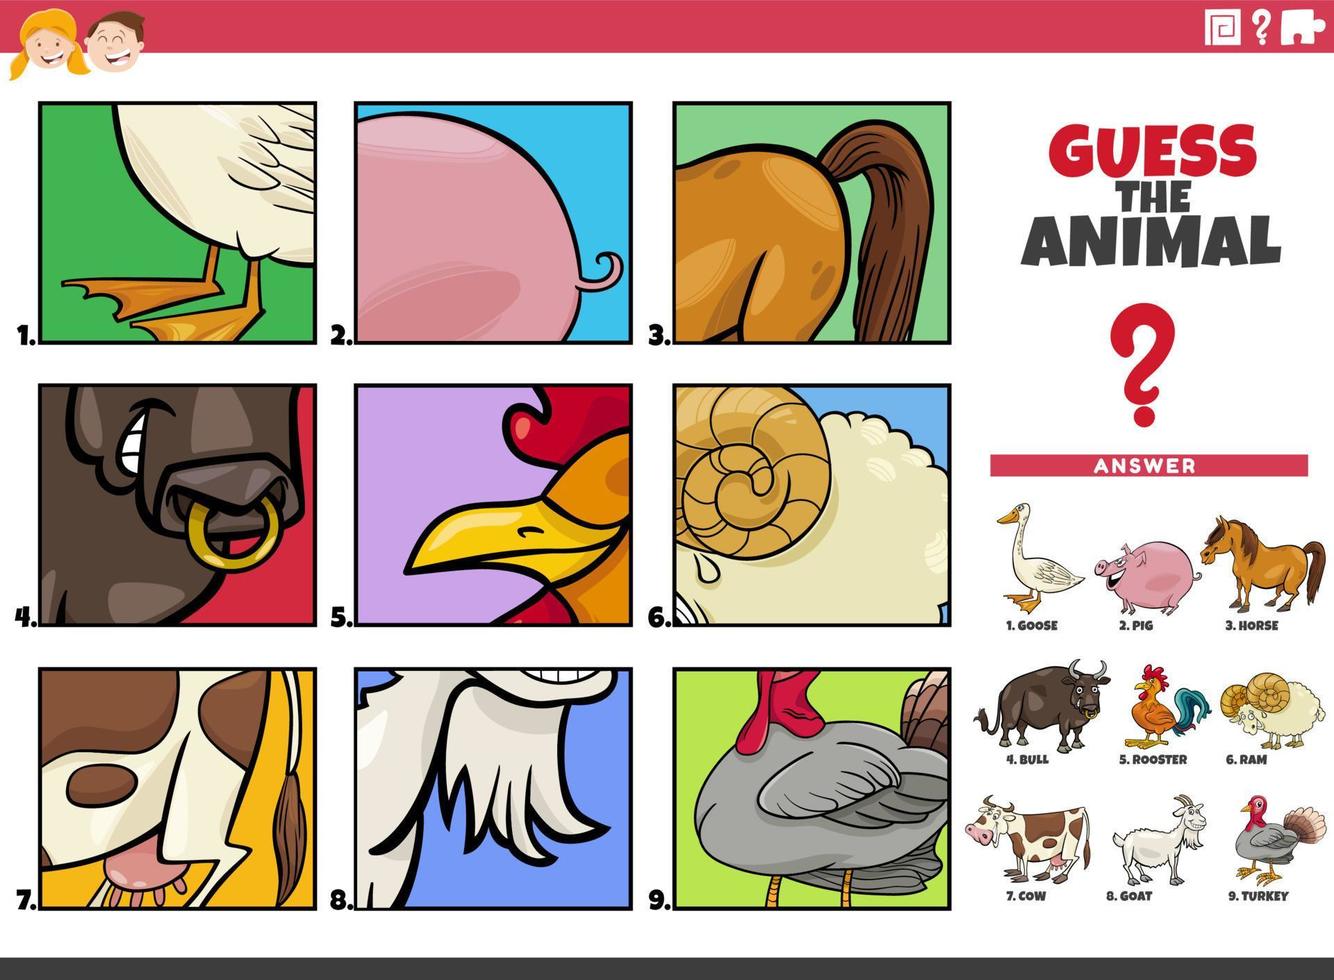 guess cartoon animal characters educational task for kids vector